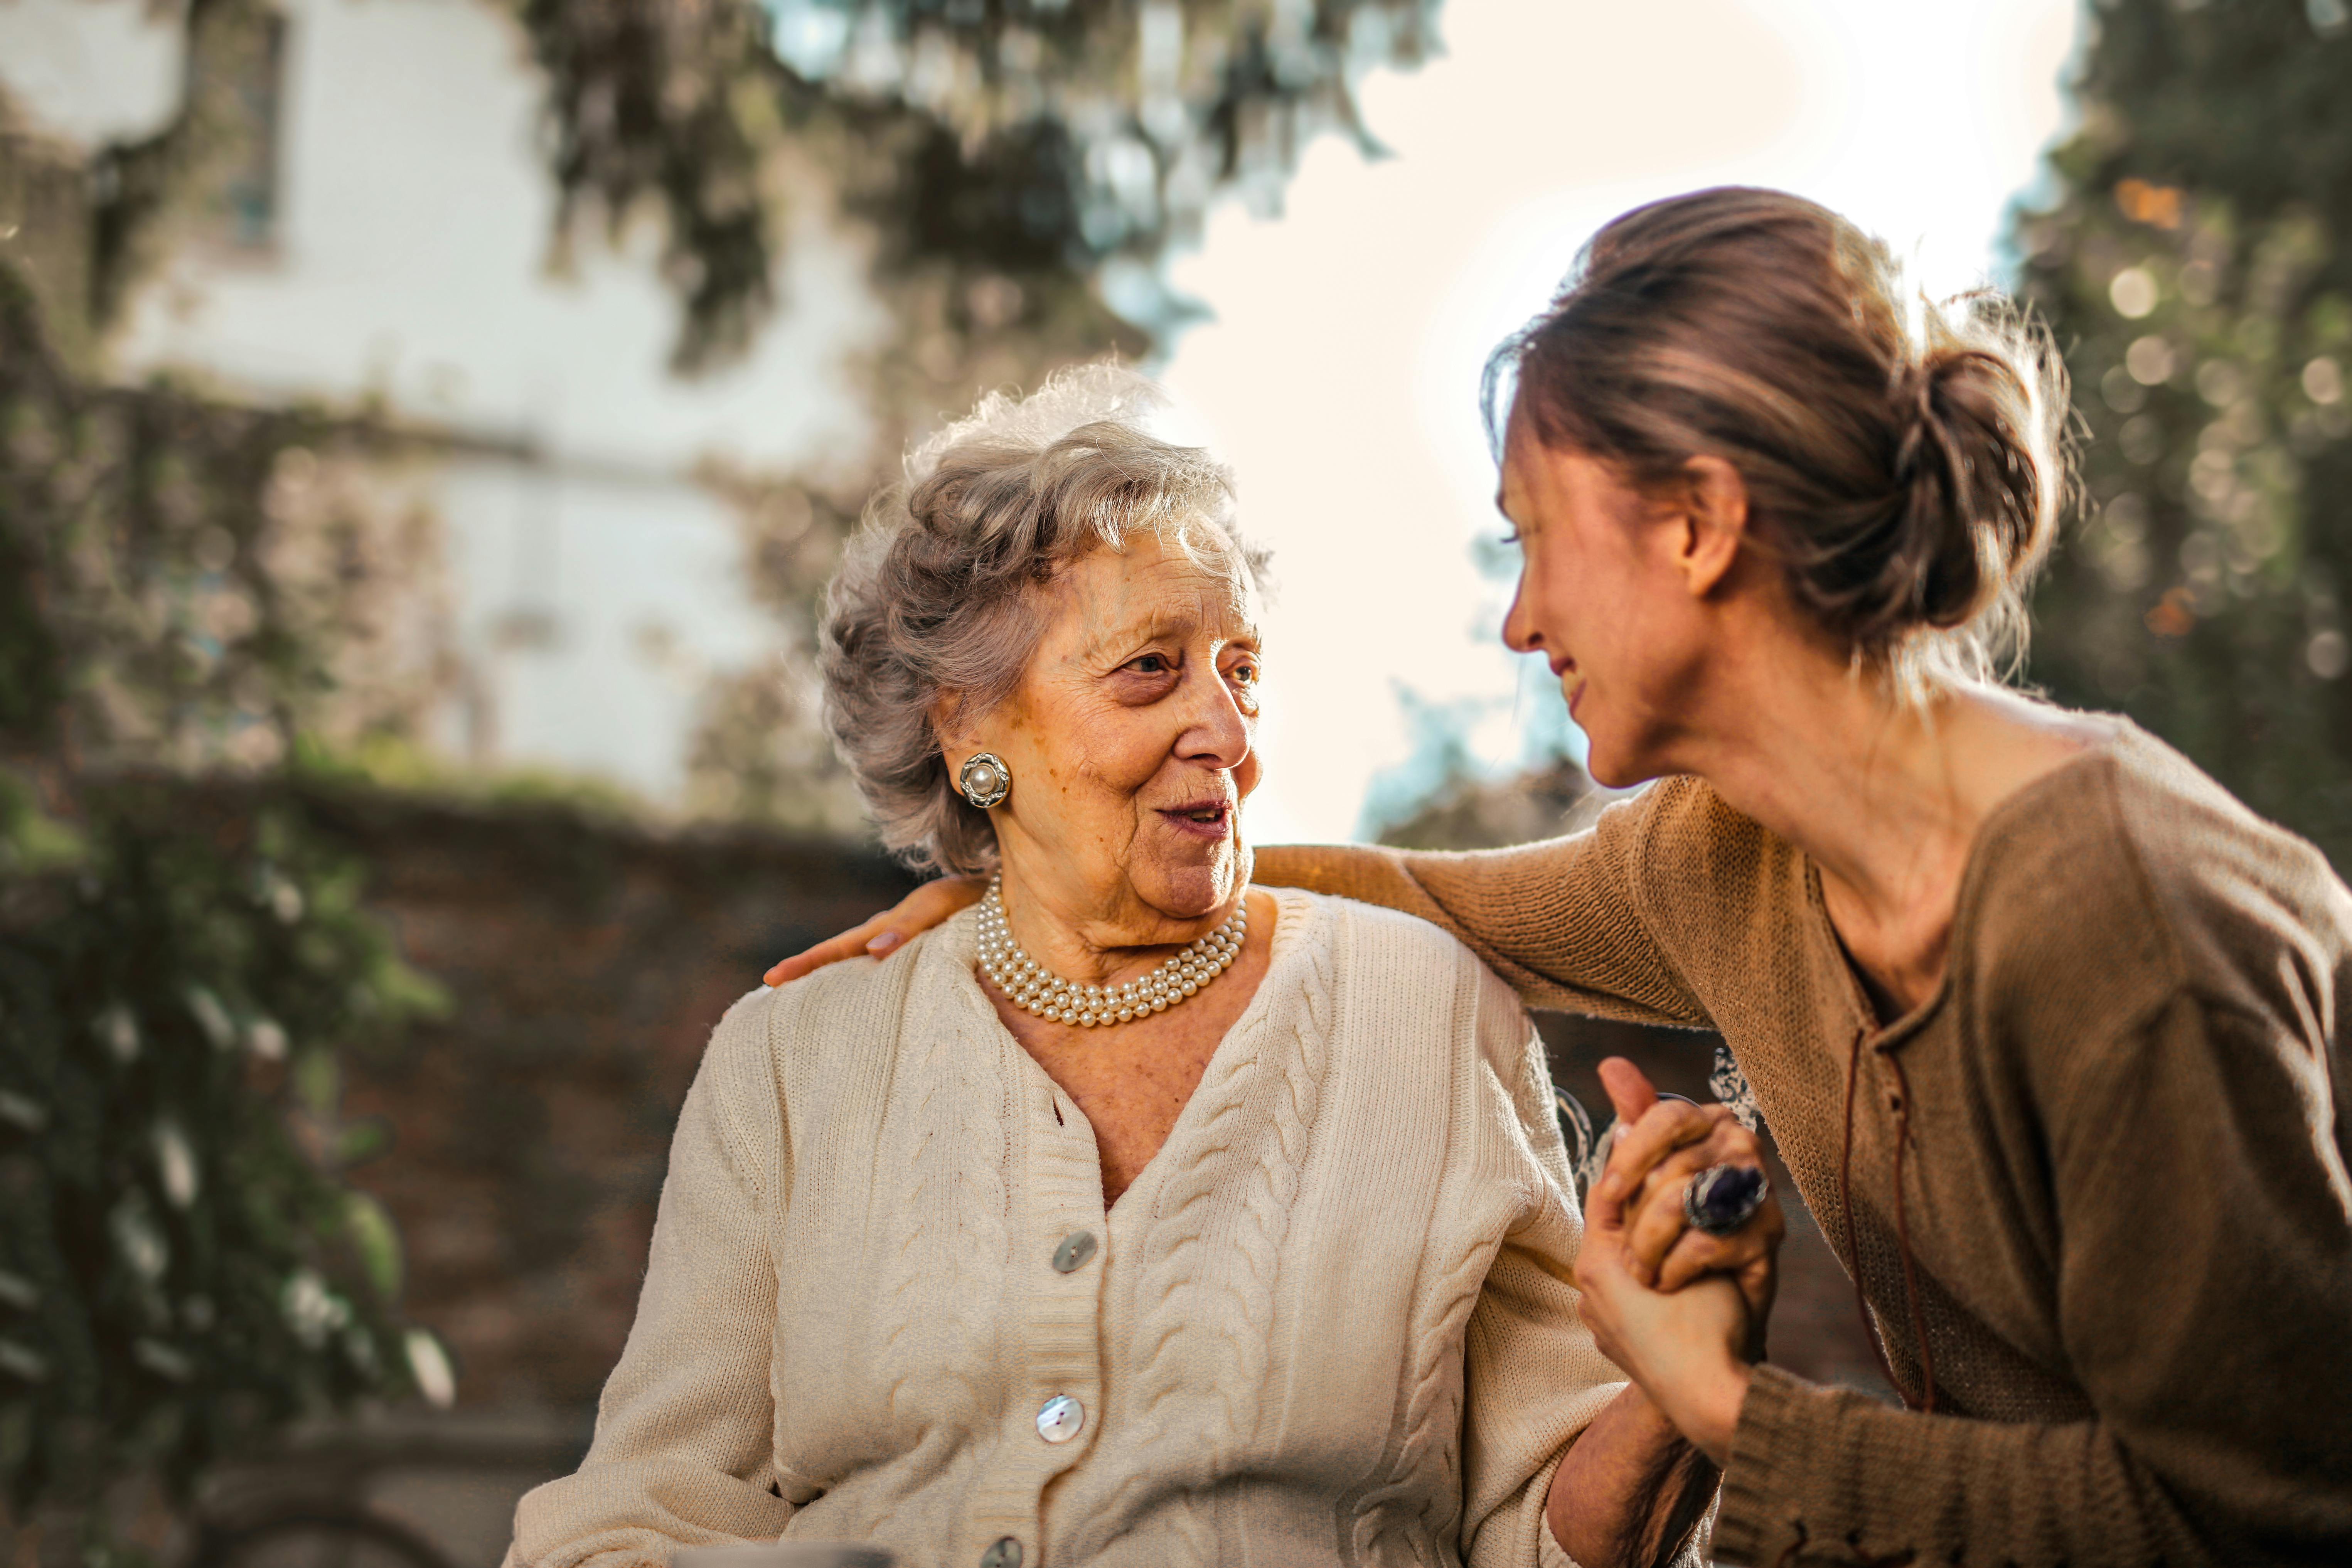 An older and younger woman conversation happily | Source: Pexels